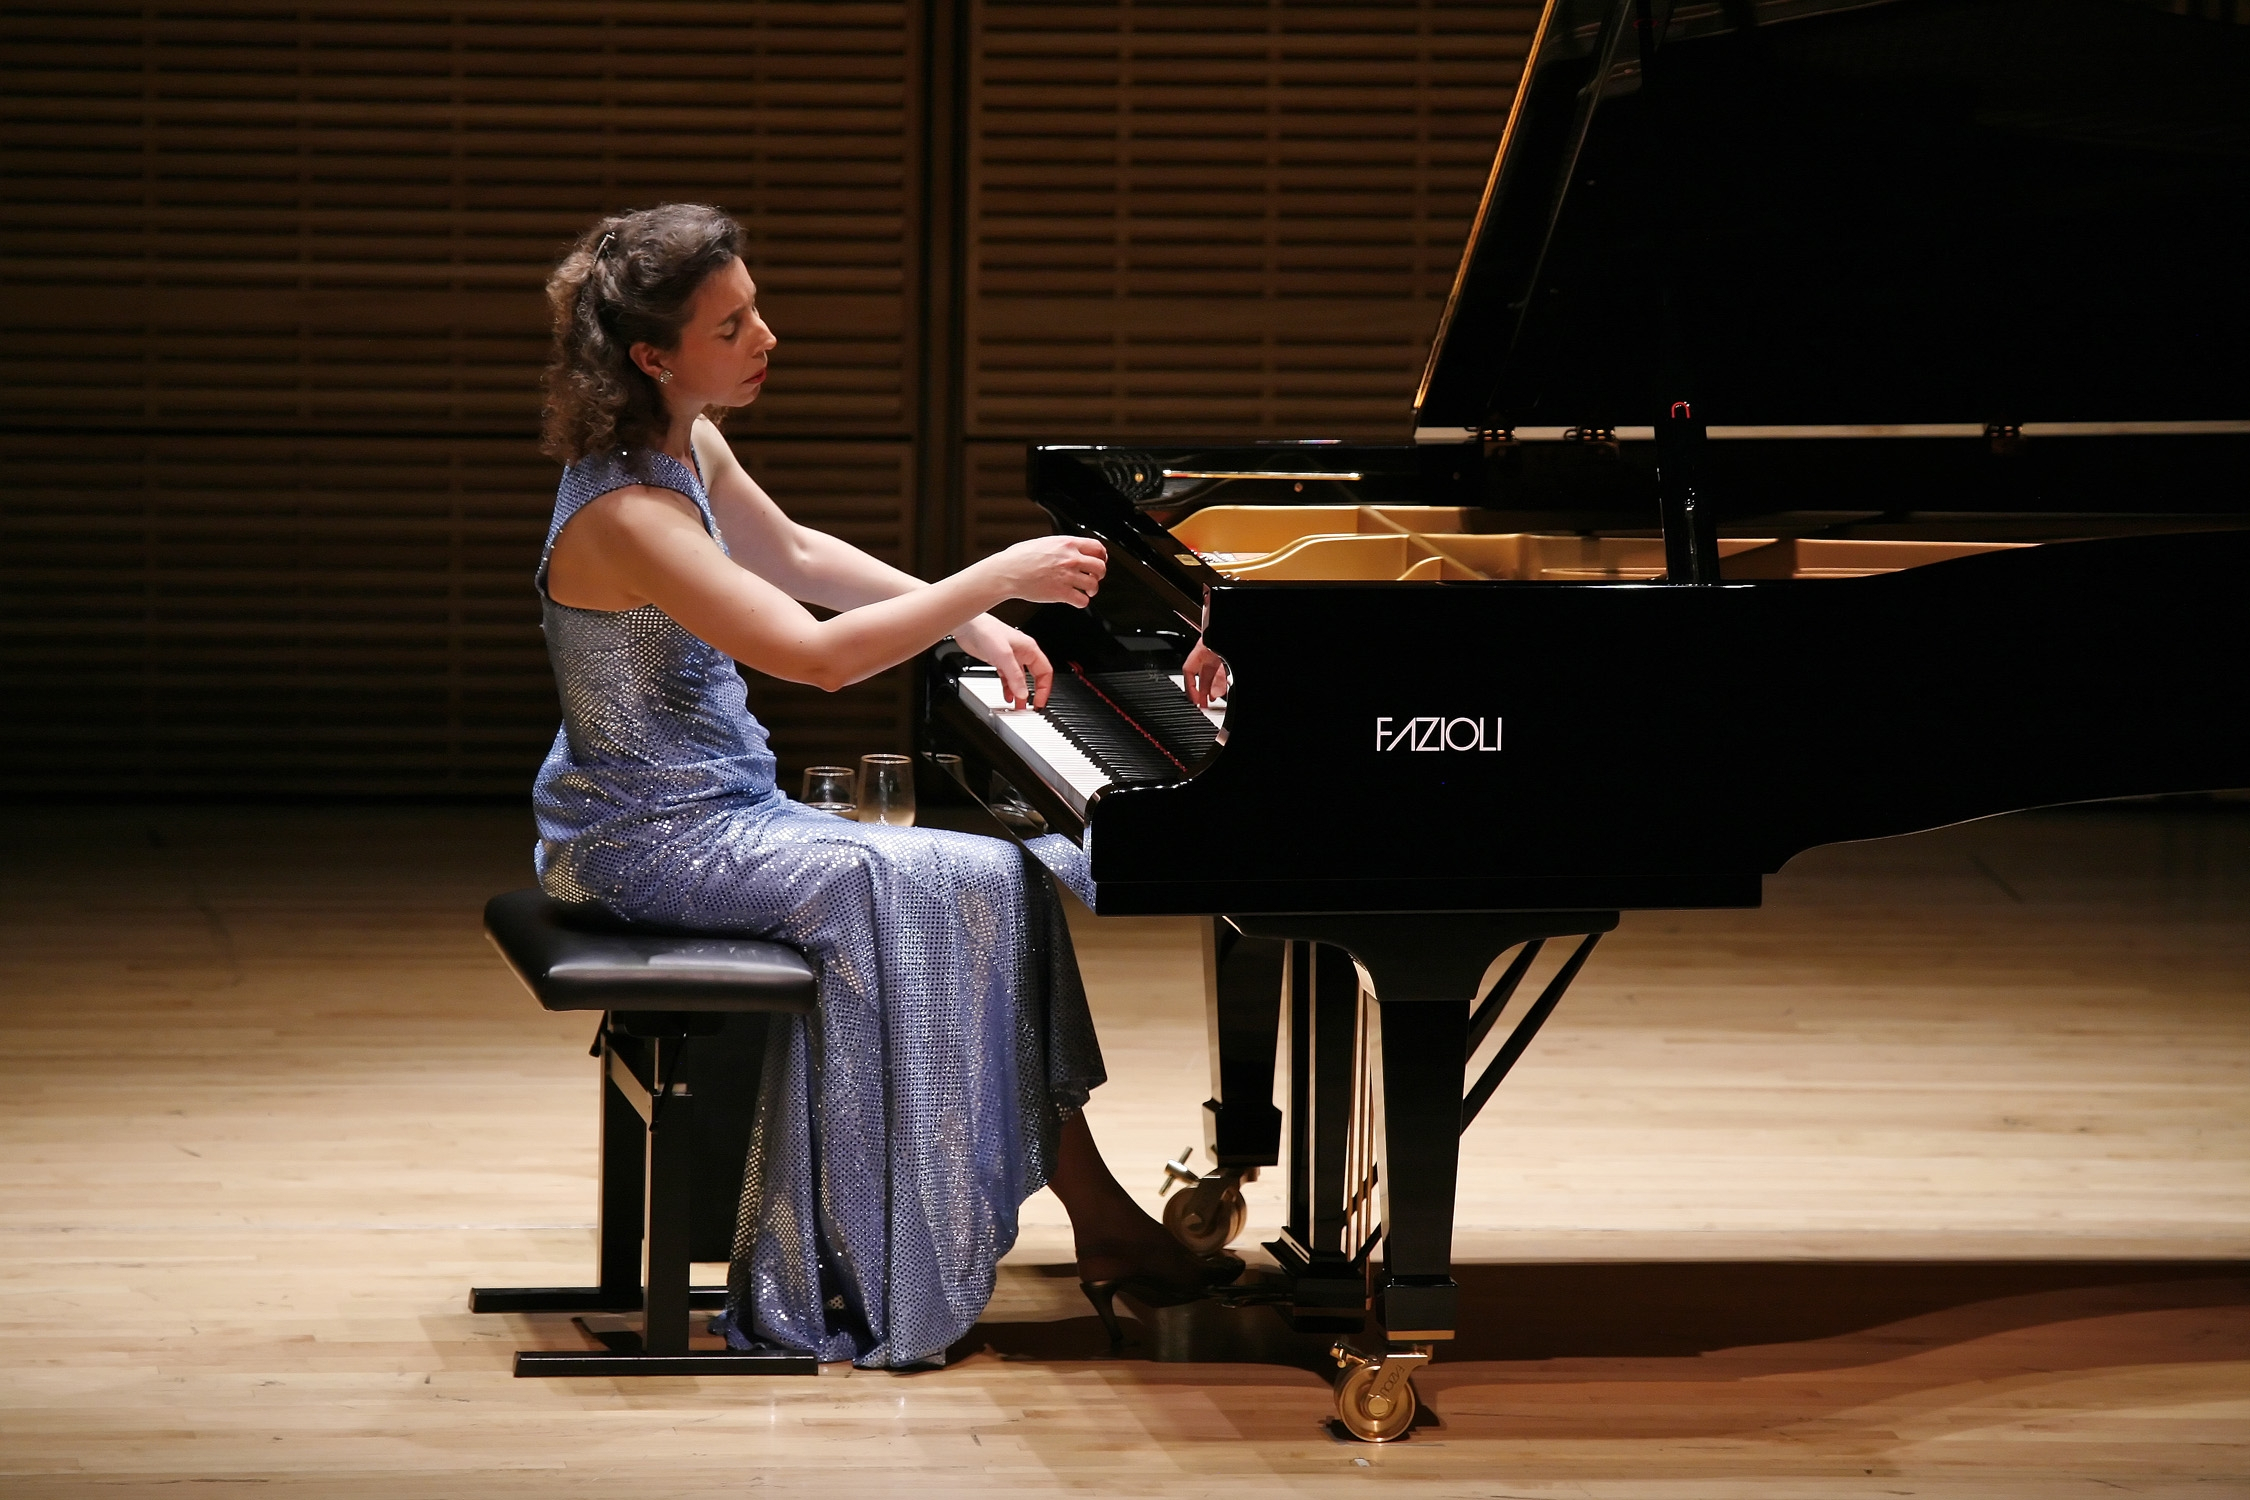 A laid-Bach experience with renowned pianist Angela Hewitt